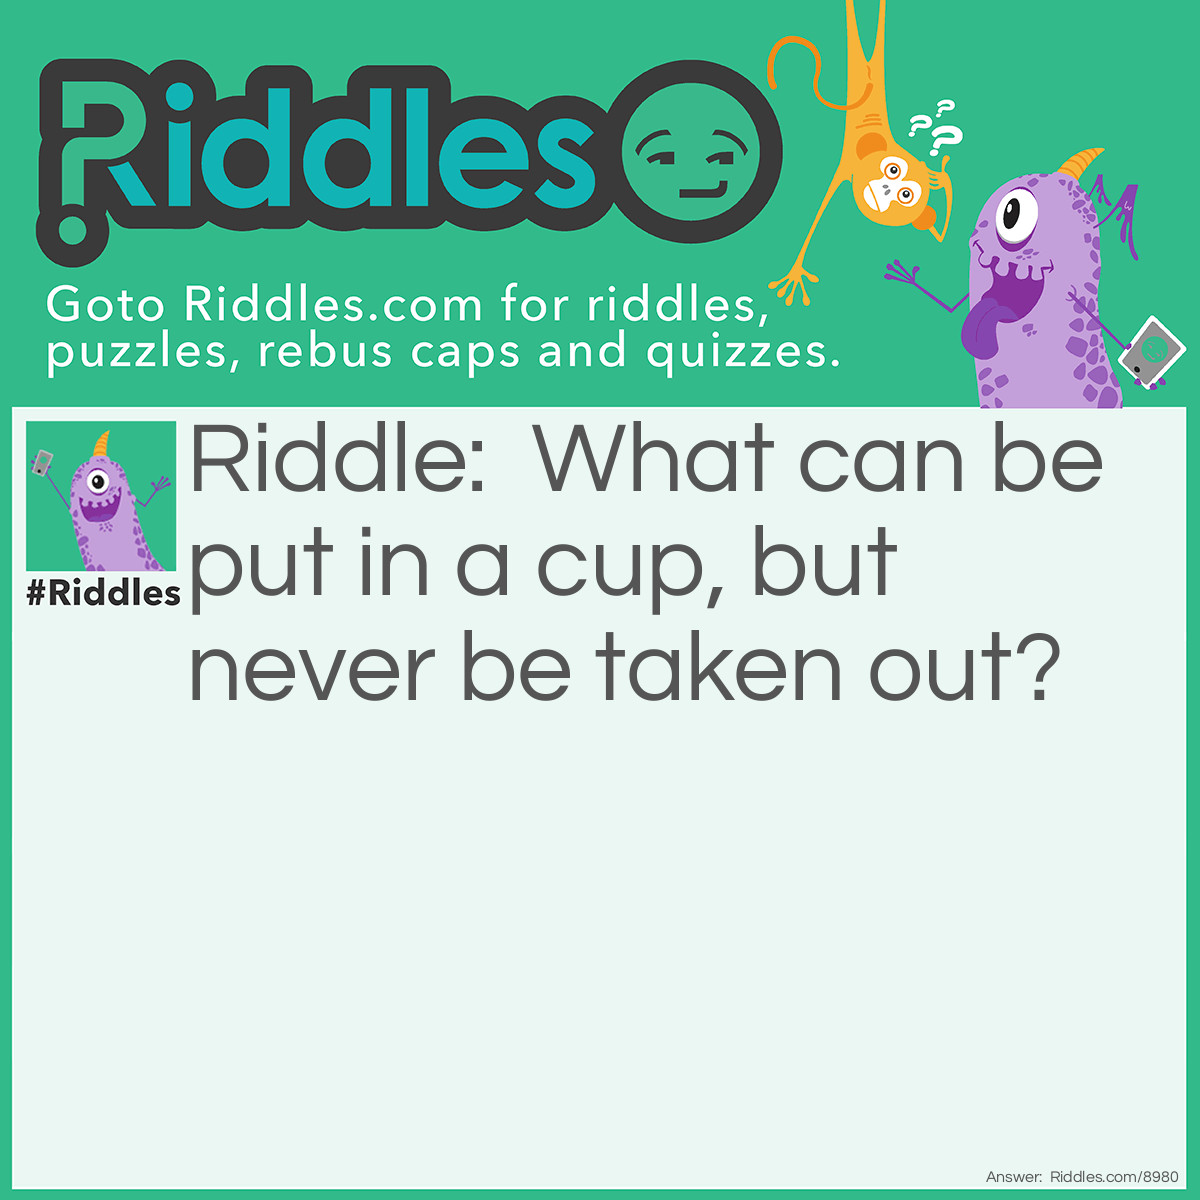 Riddle: What can be put in a cup, but never be taken out? Answer: A crack.